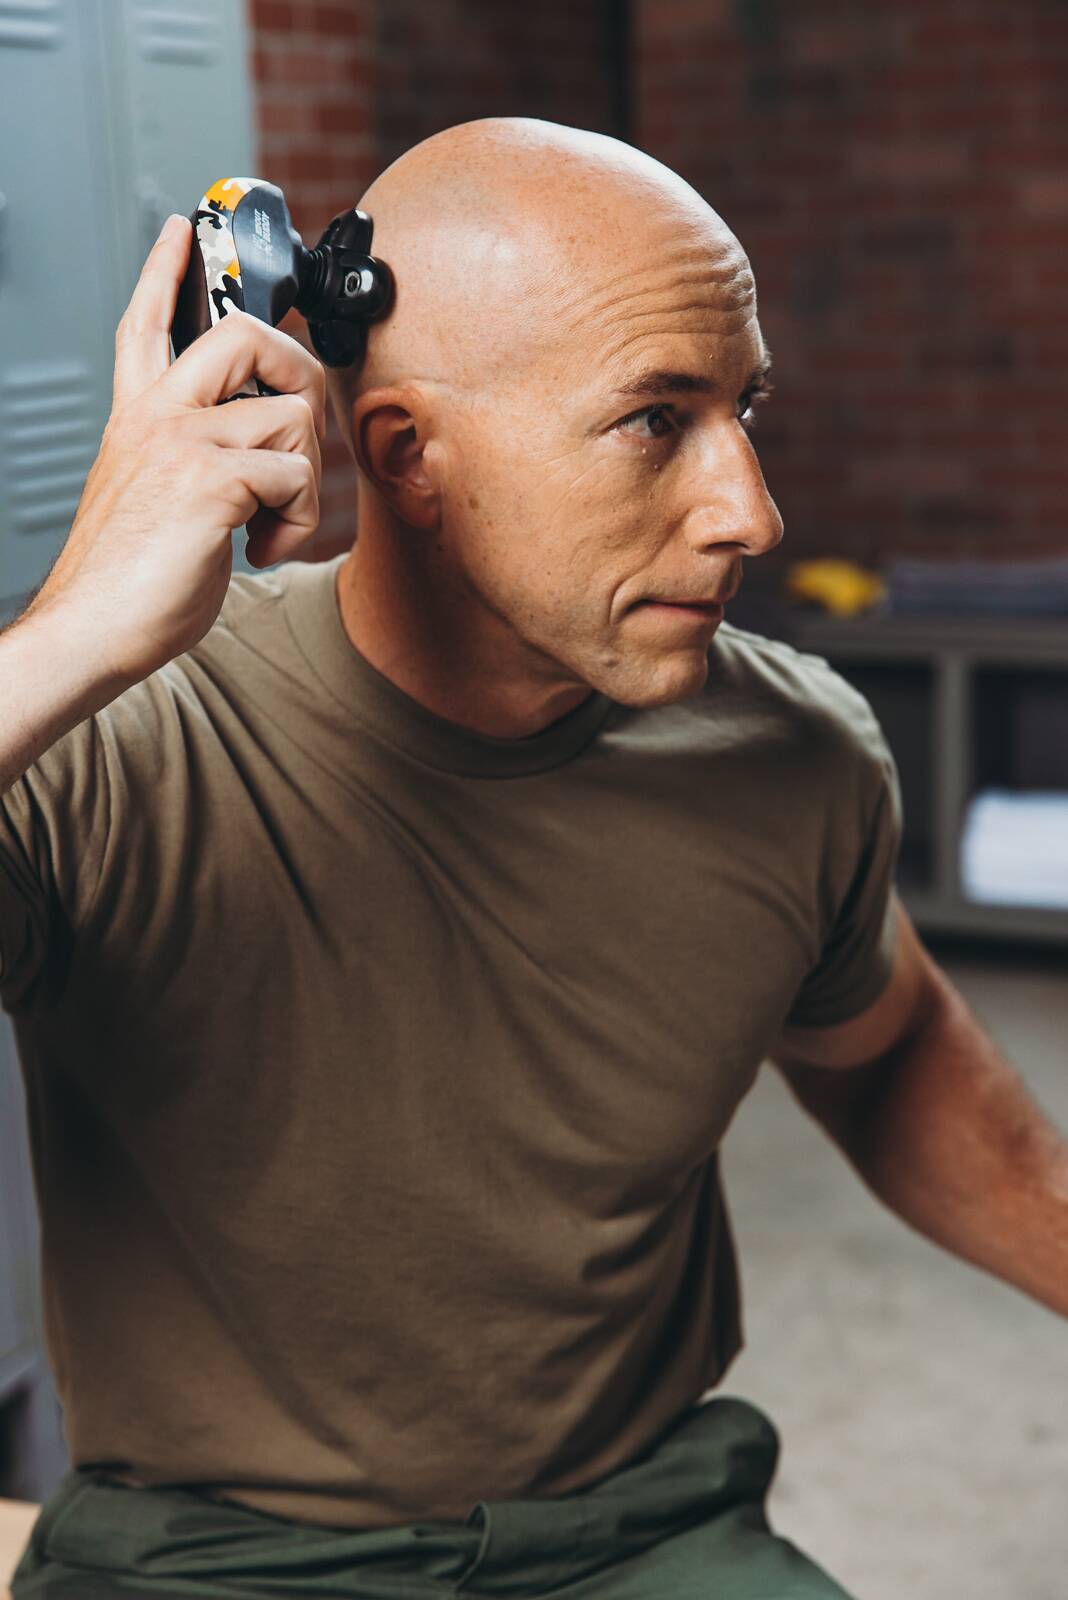 bald man in a locker room using a bald shaver to maintain military grooming standards